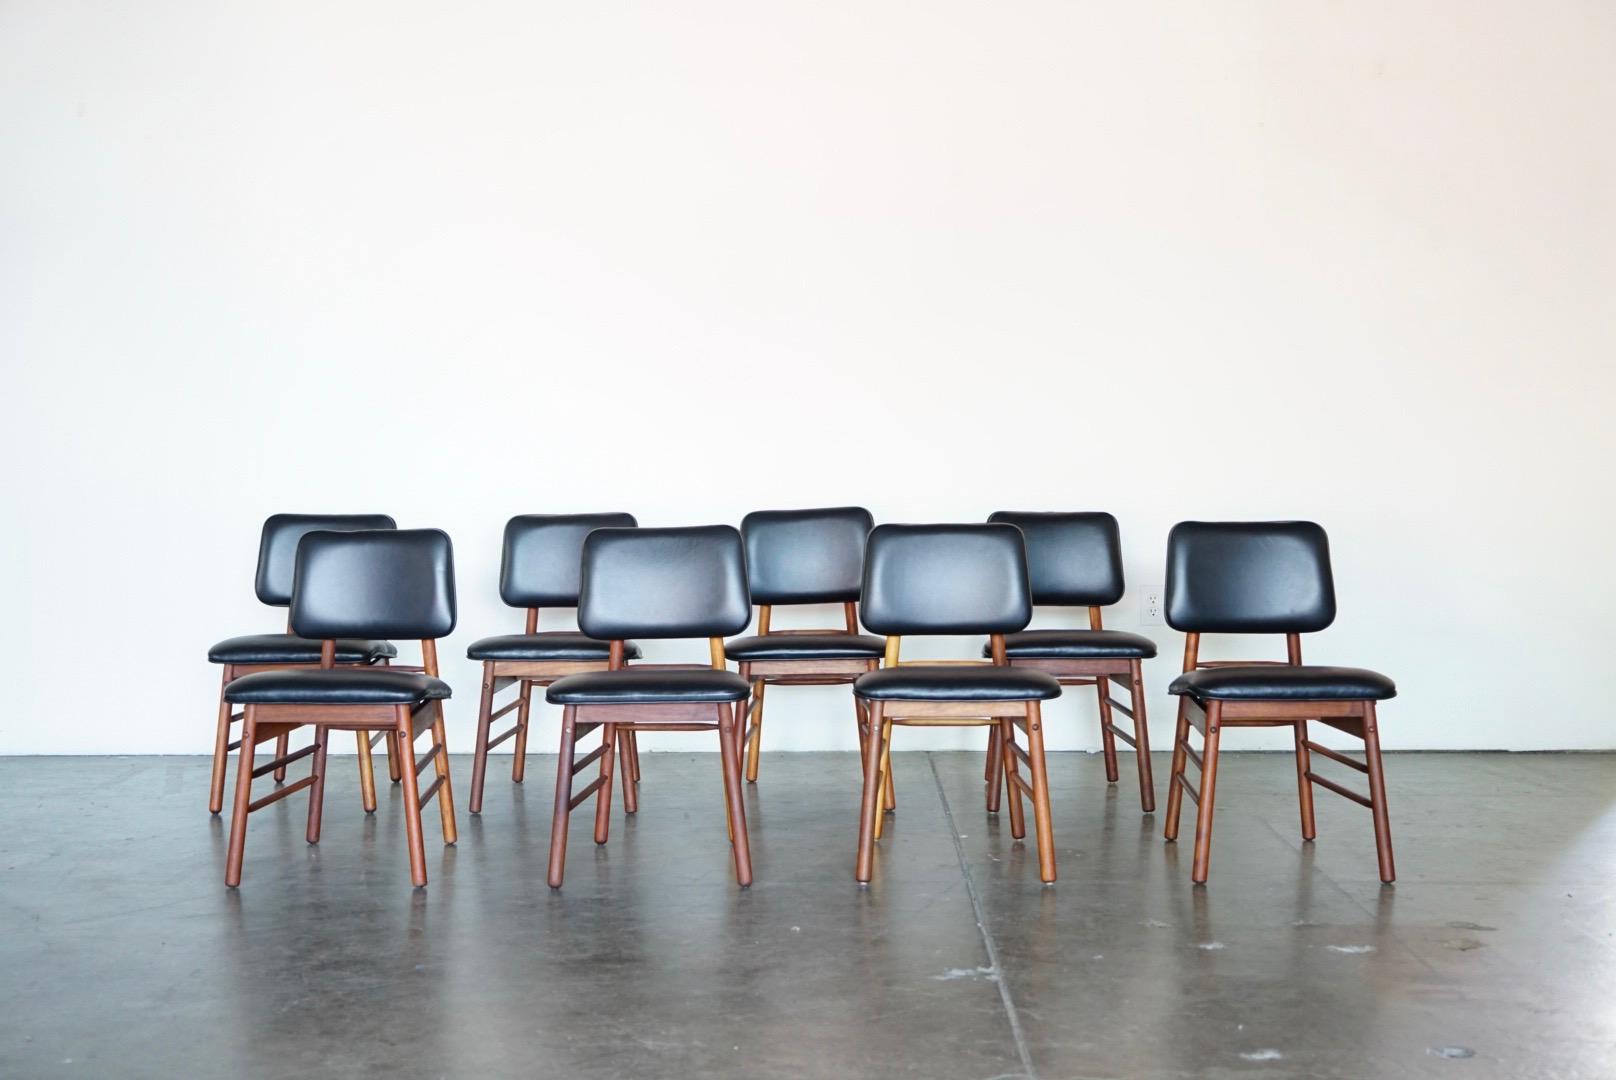 A gorgeous restored set of eight (8) dining chairs by Greta Grossman for Glenn of California. These Model 6260 chairs were designed in 1952 and produced in the early to mid-1950s. We reupholstered each chair with high quality luxury black leather